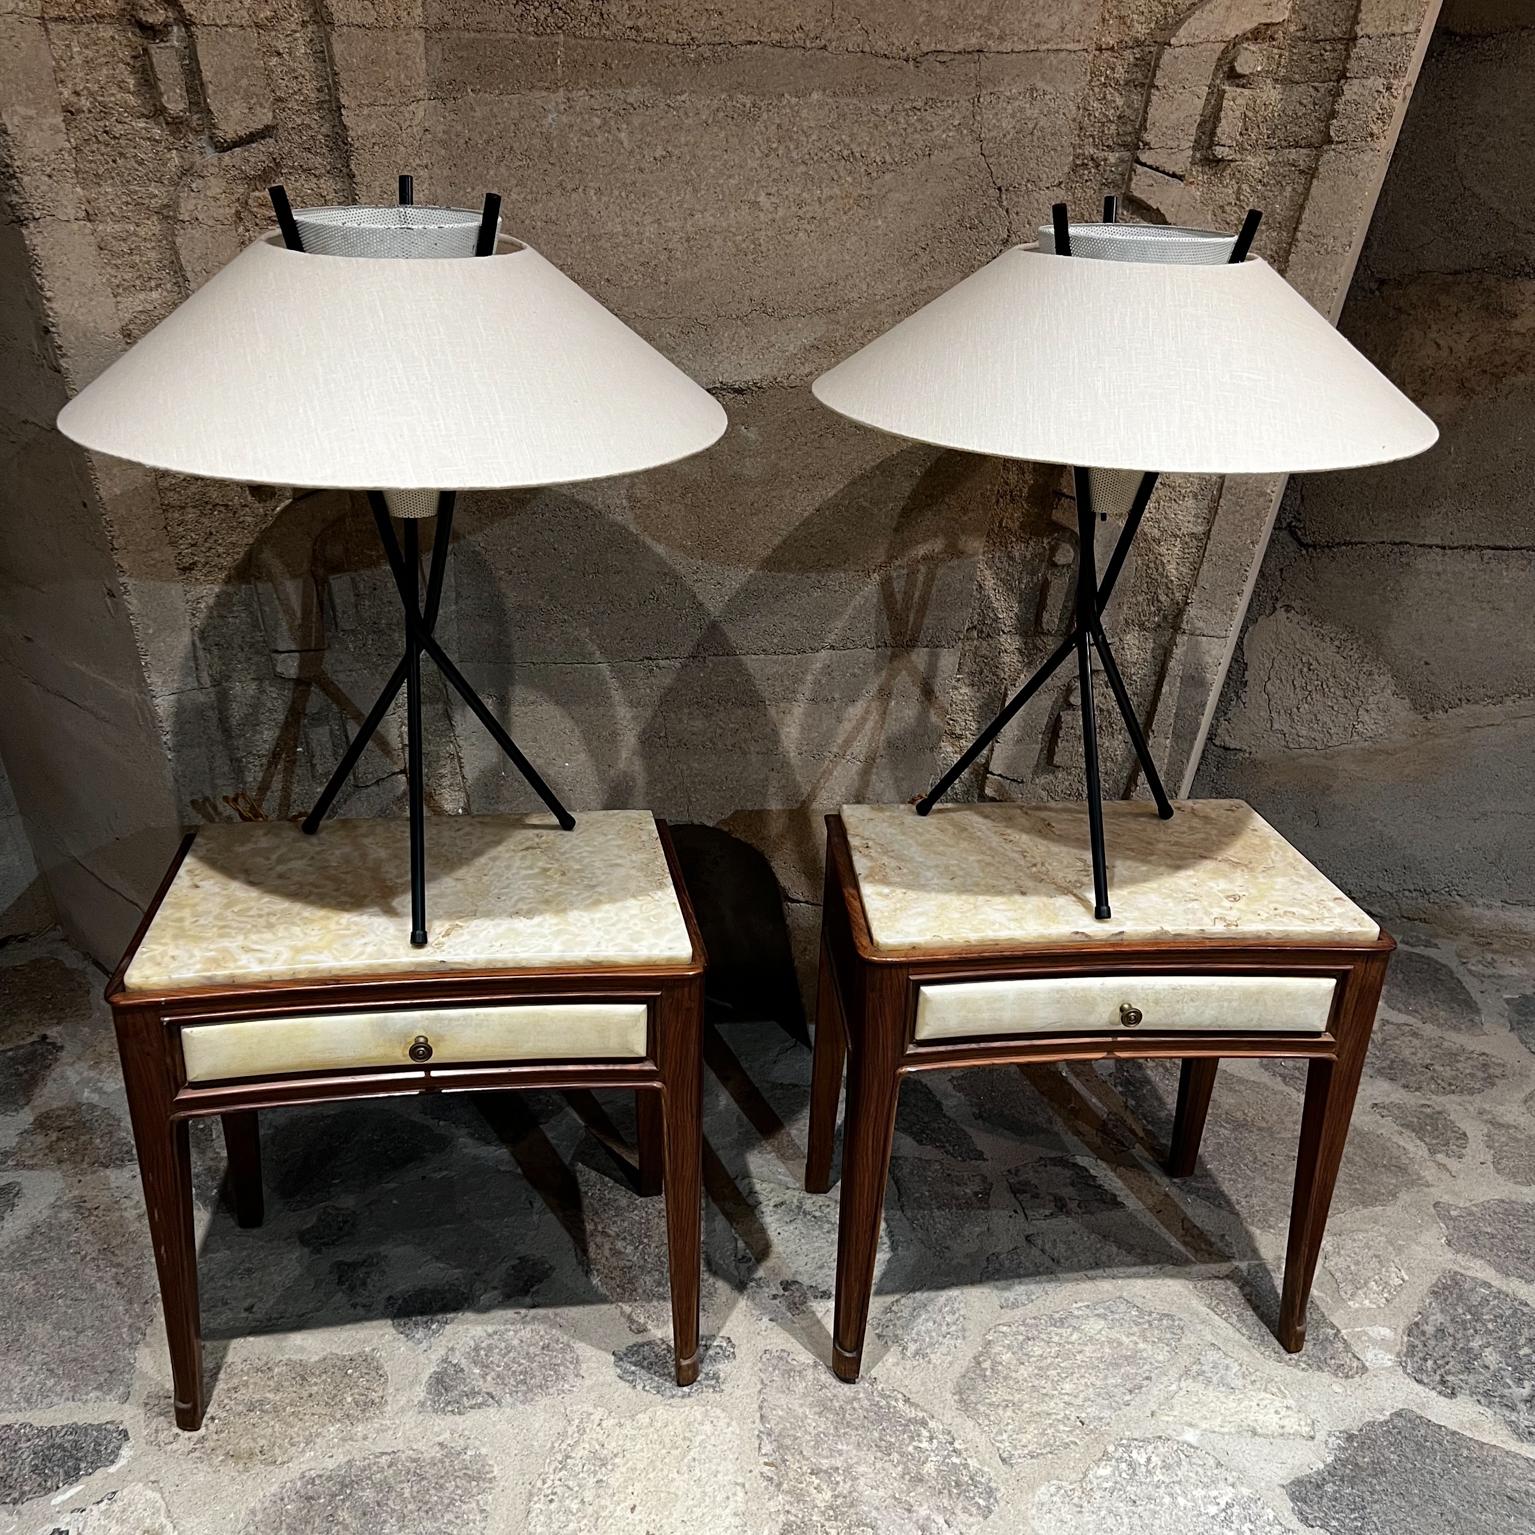 1950s Gerald Thurston Tripod Table Lamp Pair Space Age Modern Lightolier For Sale 1